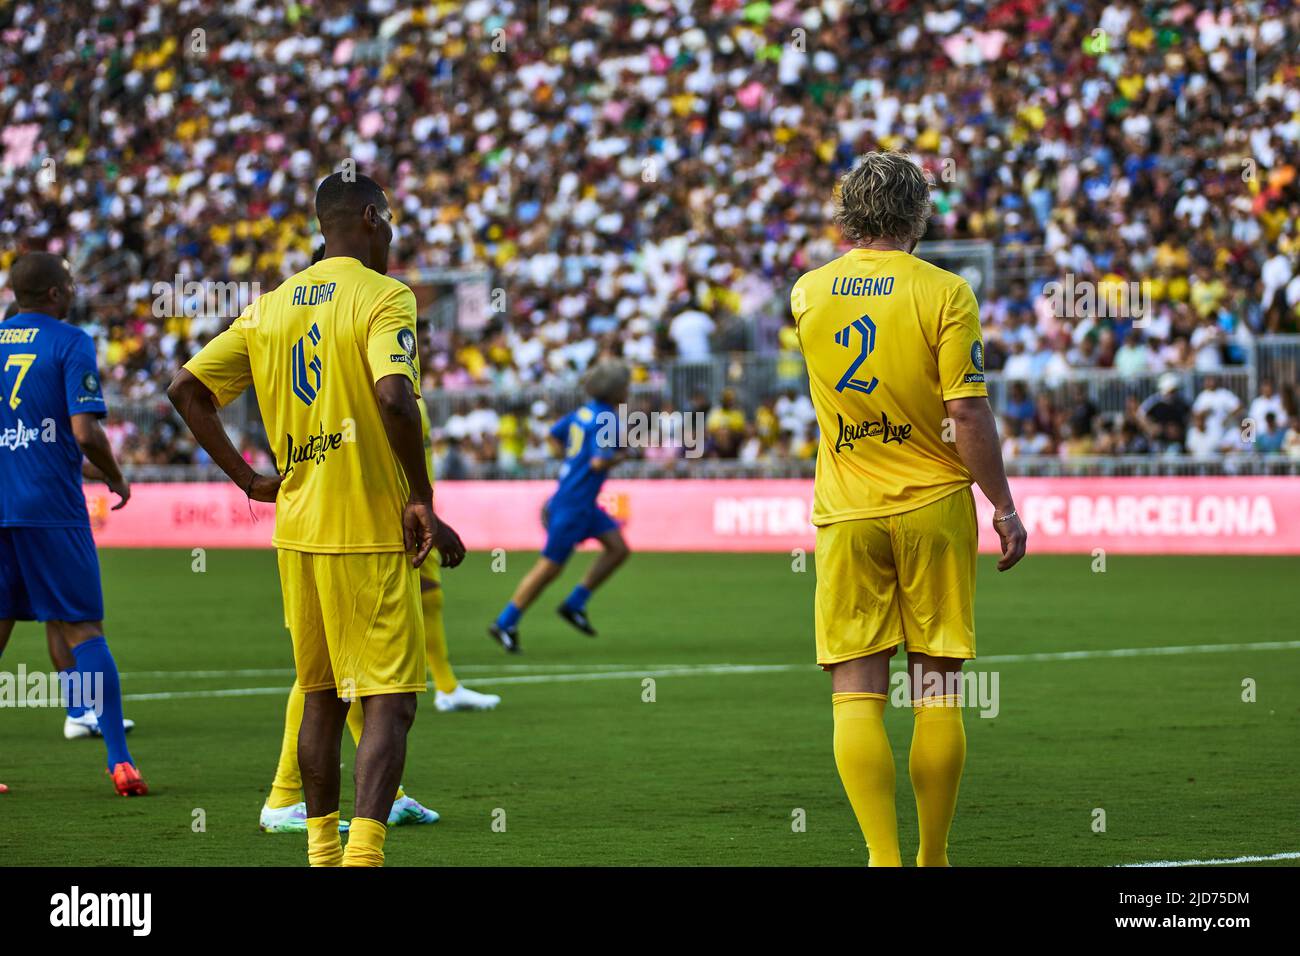 Fort Lauderdale, FL, USA. 18th June 2022. 2R - Diego Lugano - Former Uruguayan national team player, 6R - Aldair - Former Brazilian national team player during soccer match The Beautiful Game by R10 and RC3 owned global soccer football icons and Brazilian duo Ronaldinho and Roberto Carlos at DRV Pink Stadium in Florida, USA. Credit: Yaroslav Sabitov/YES Market Media/Alamy Live News. Stock Photo